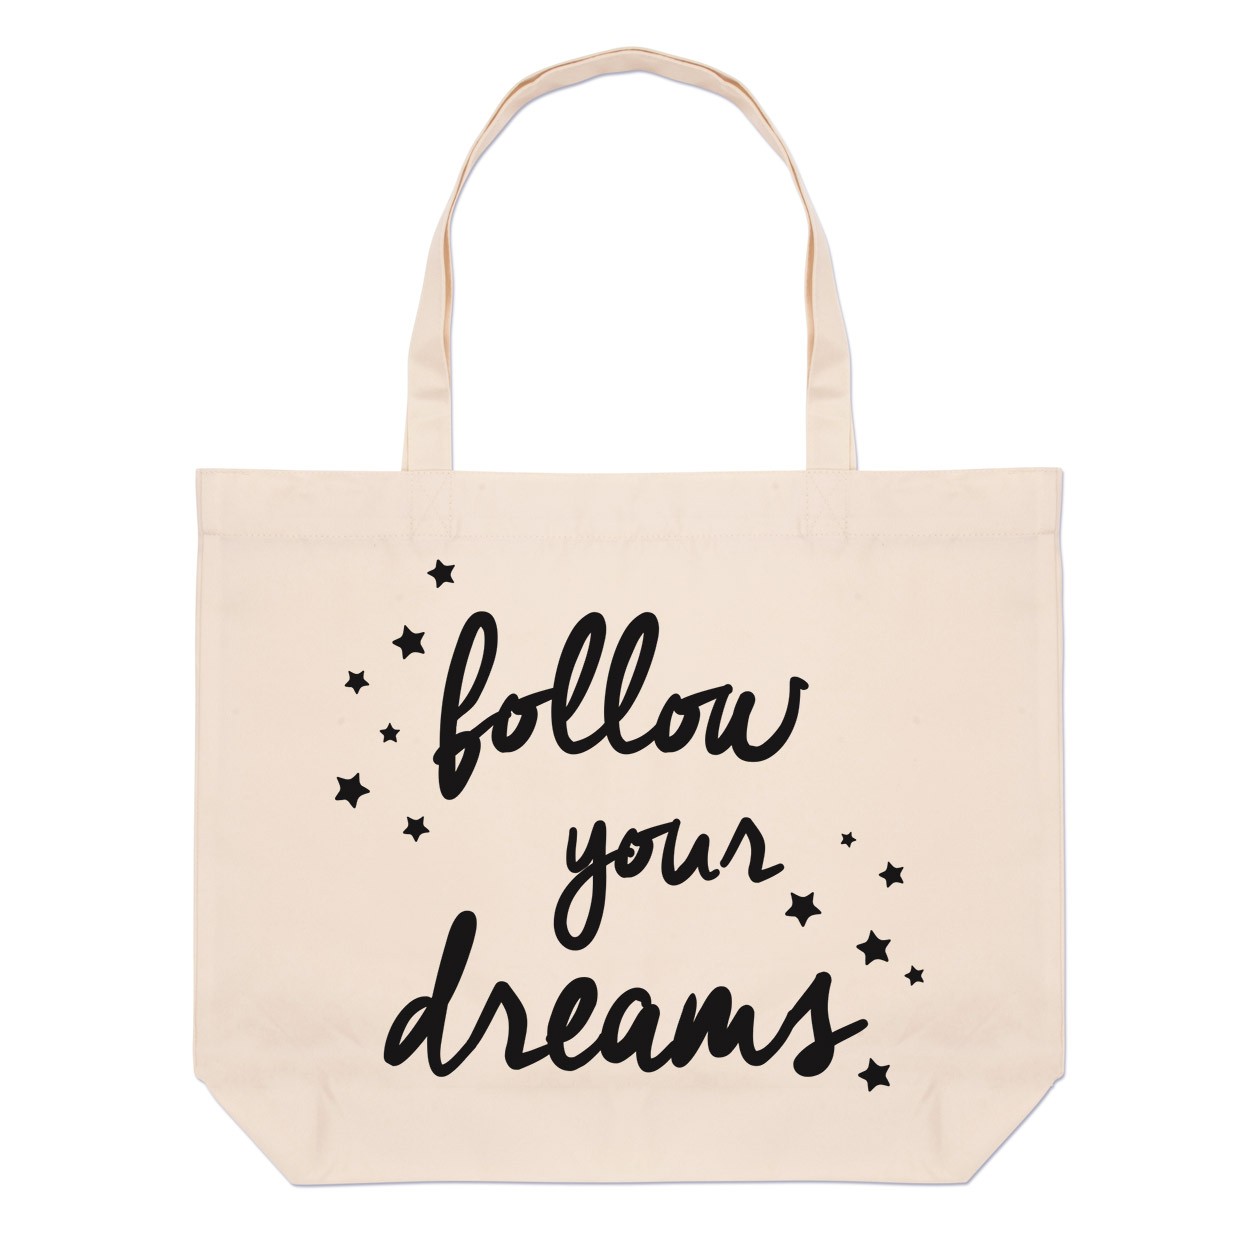 Follow Your Dreams Large Beach Tote Bag